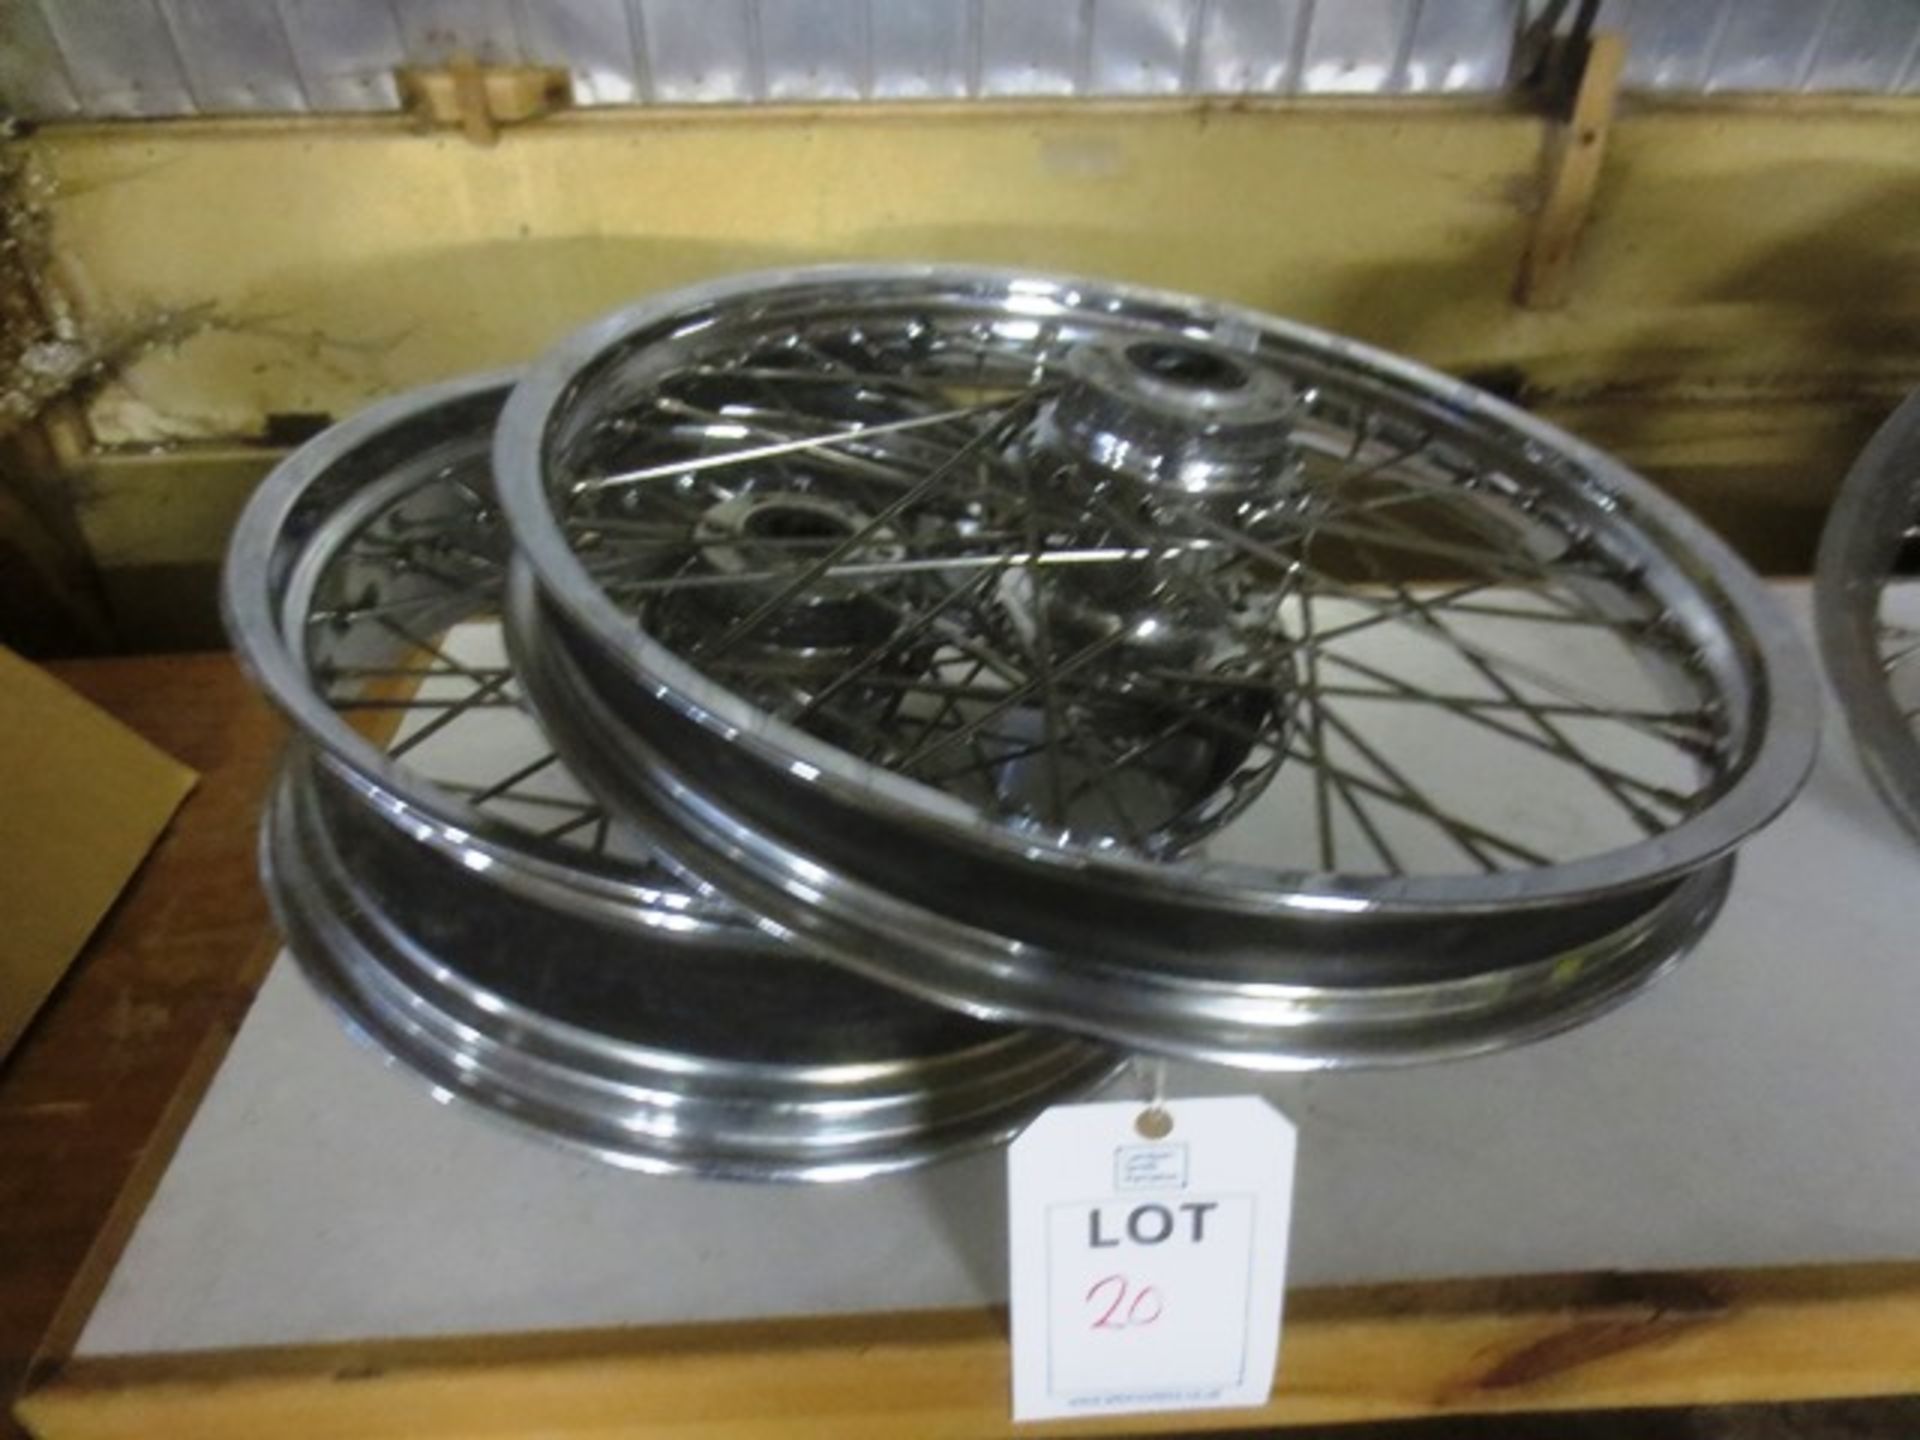 Pair of Victory multi-spoke motorcycle wheels, incl. 18 x MT5 00H2-0903-E-DOT, 10068-5133870 and